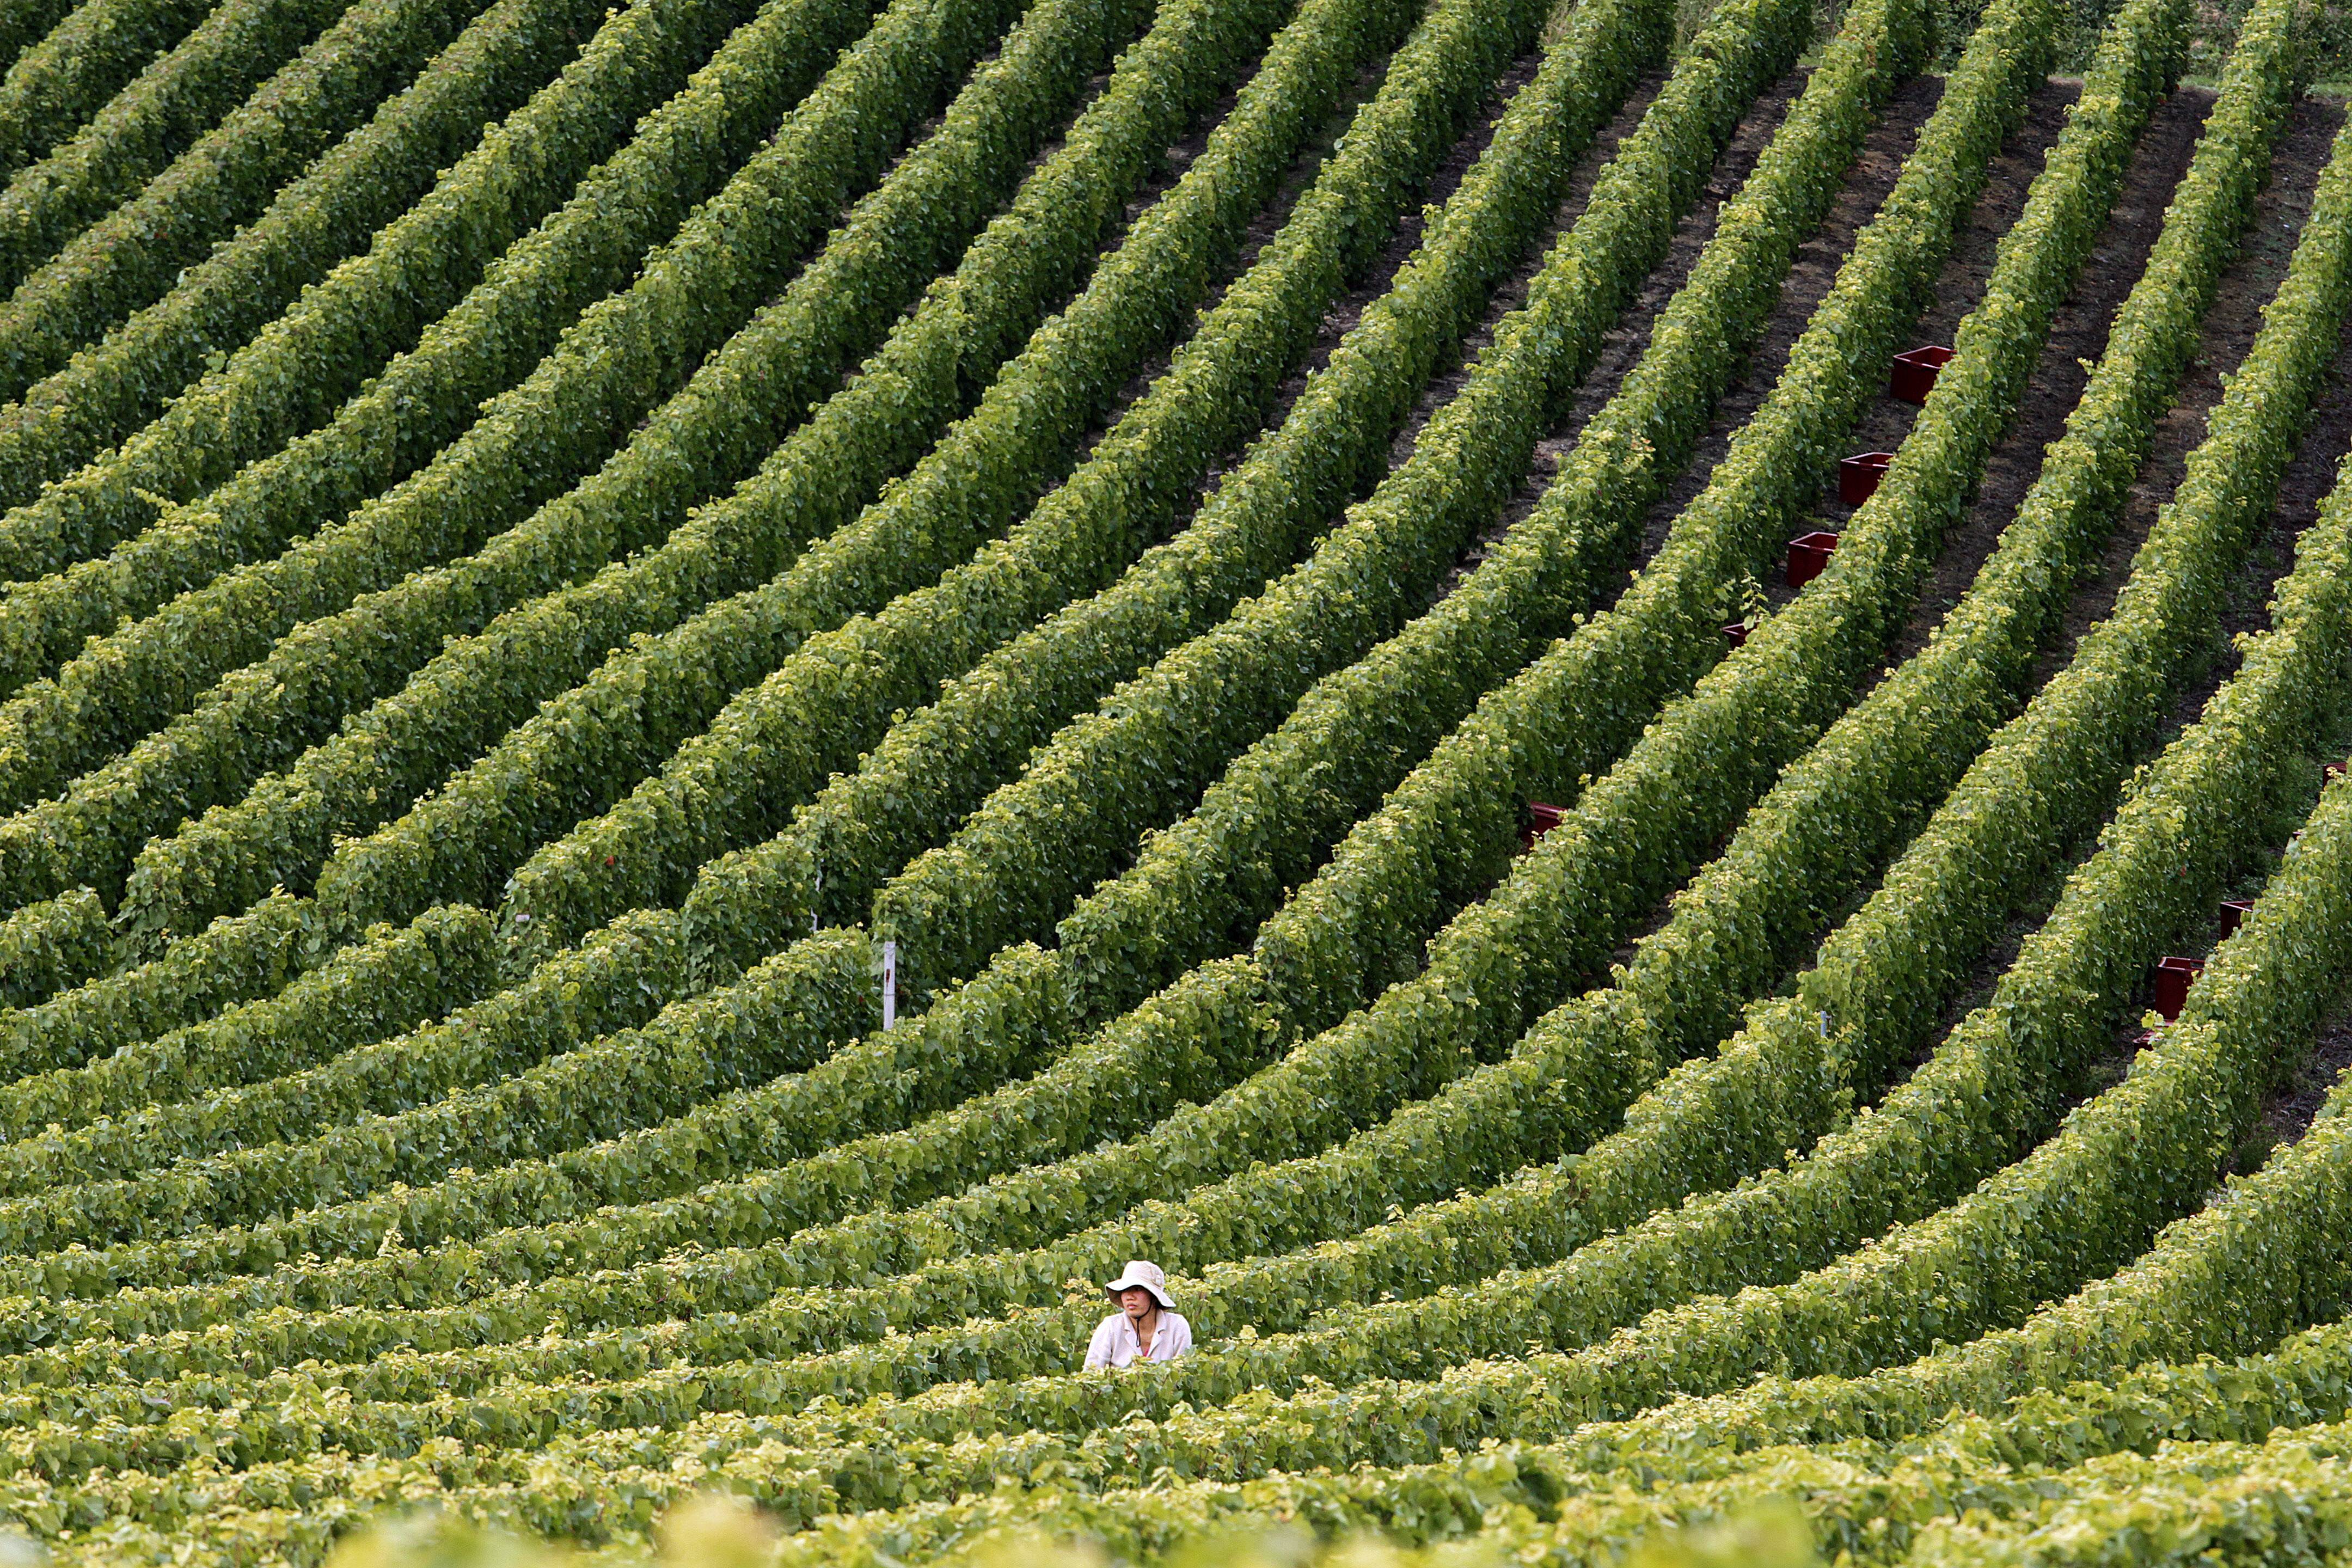 A vineyard in Champagne. Photo: AFP